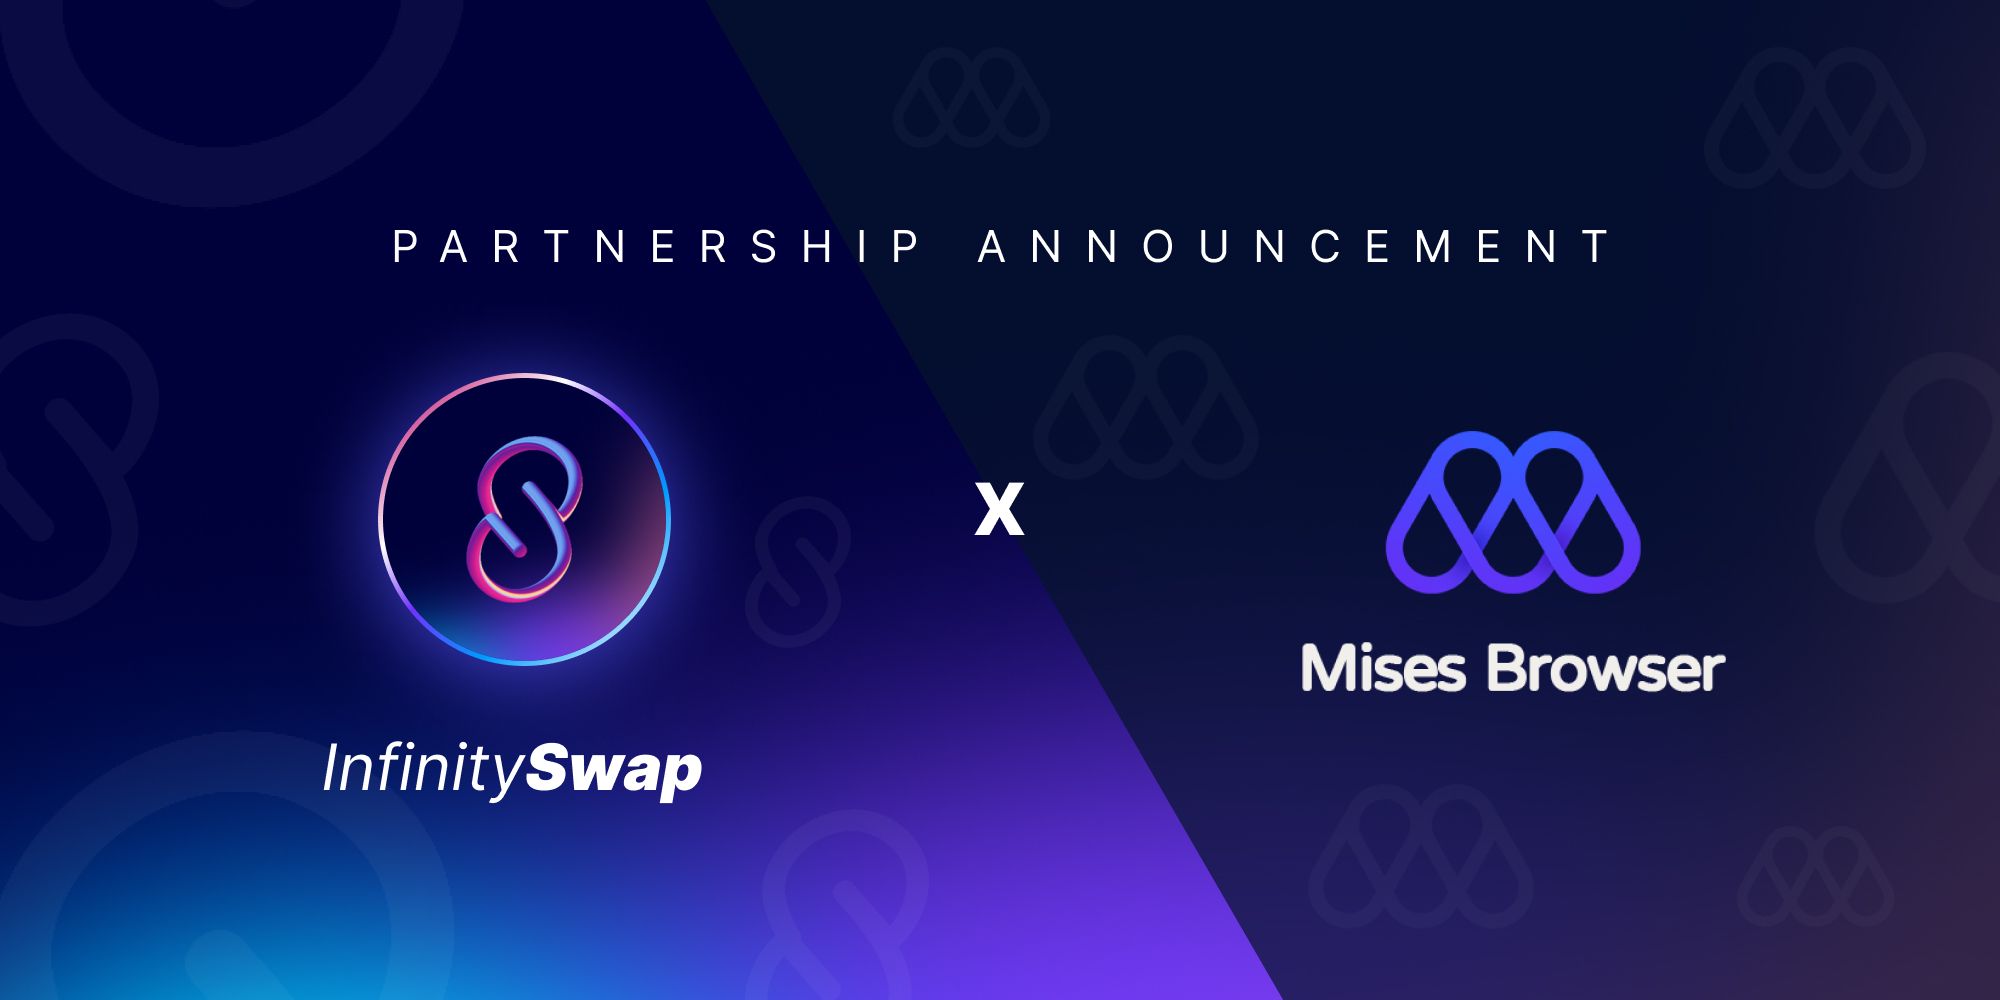 InfinitySwap Forms a Strategic Partnership with Mises Browser